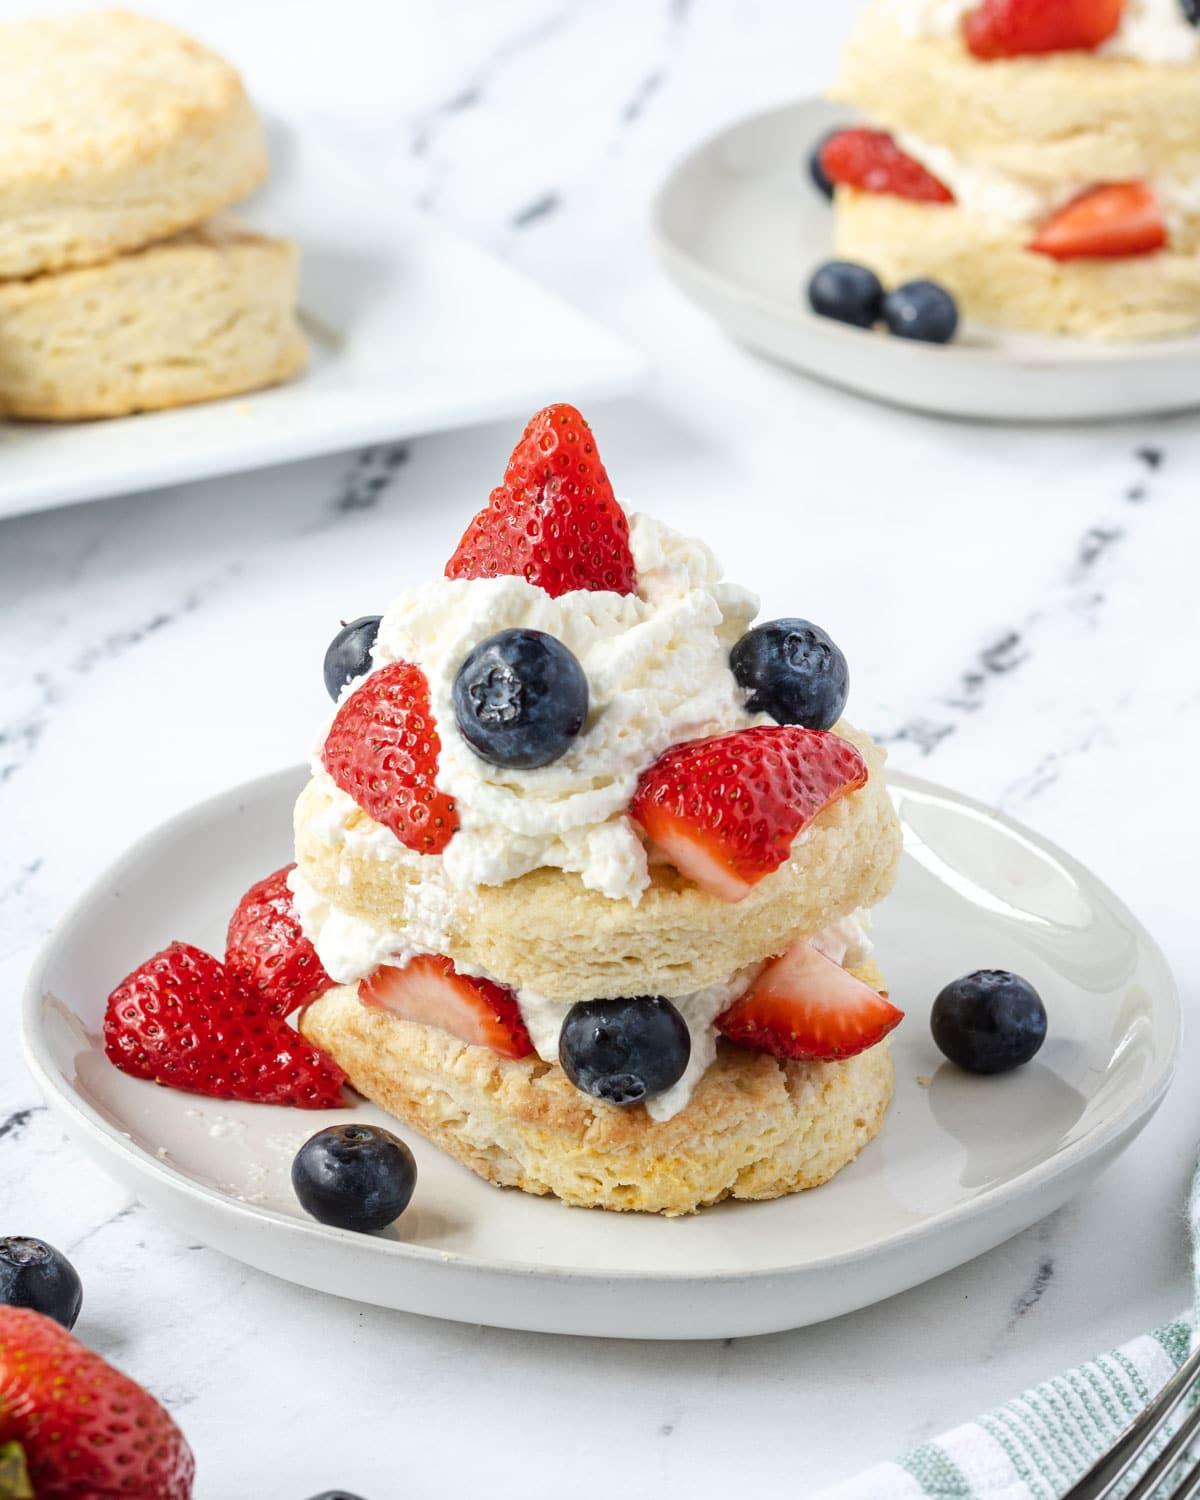 Whipped cream on shortcake with strawberries and blueberries.